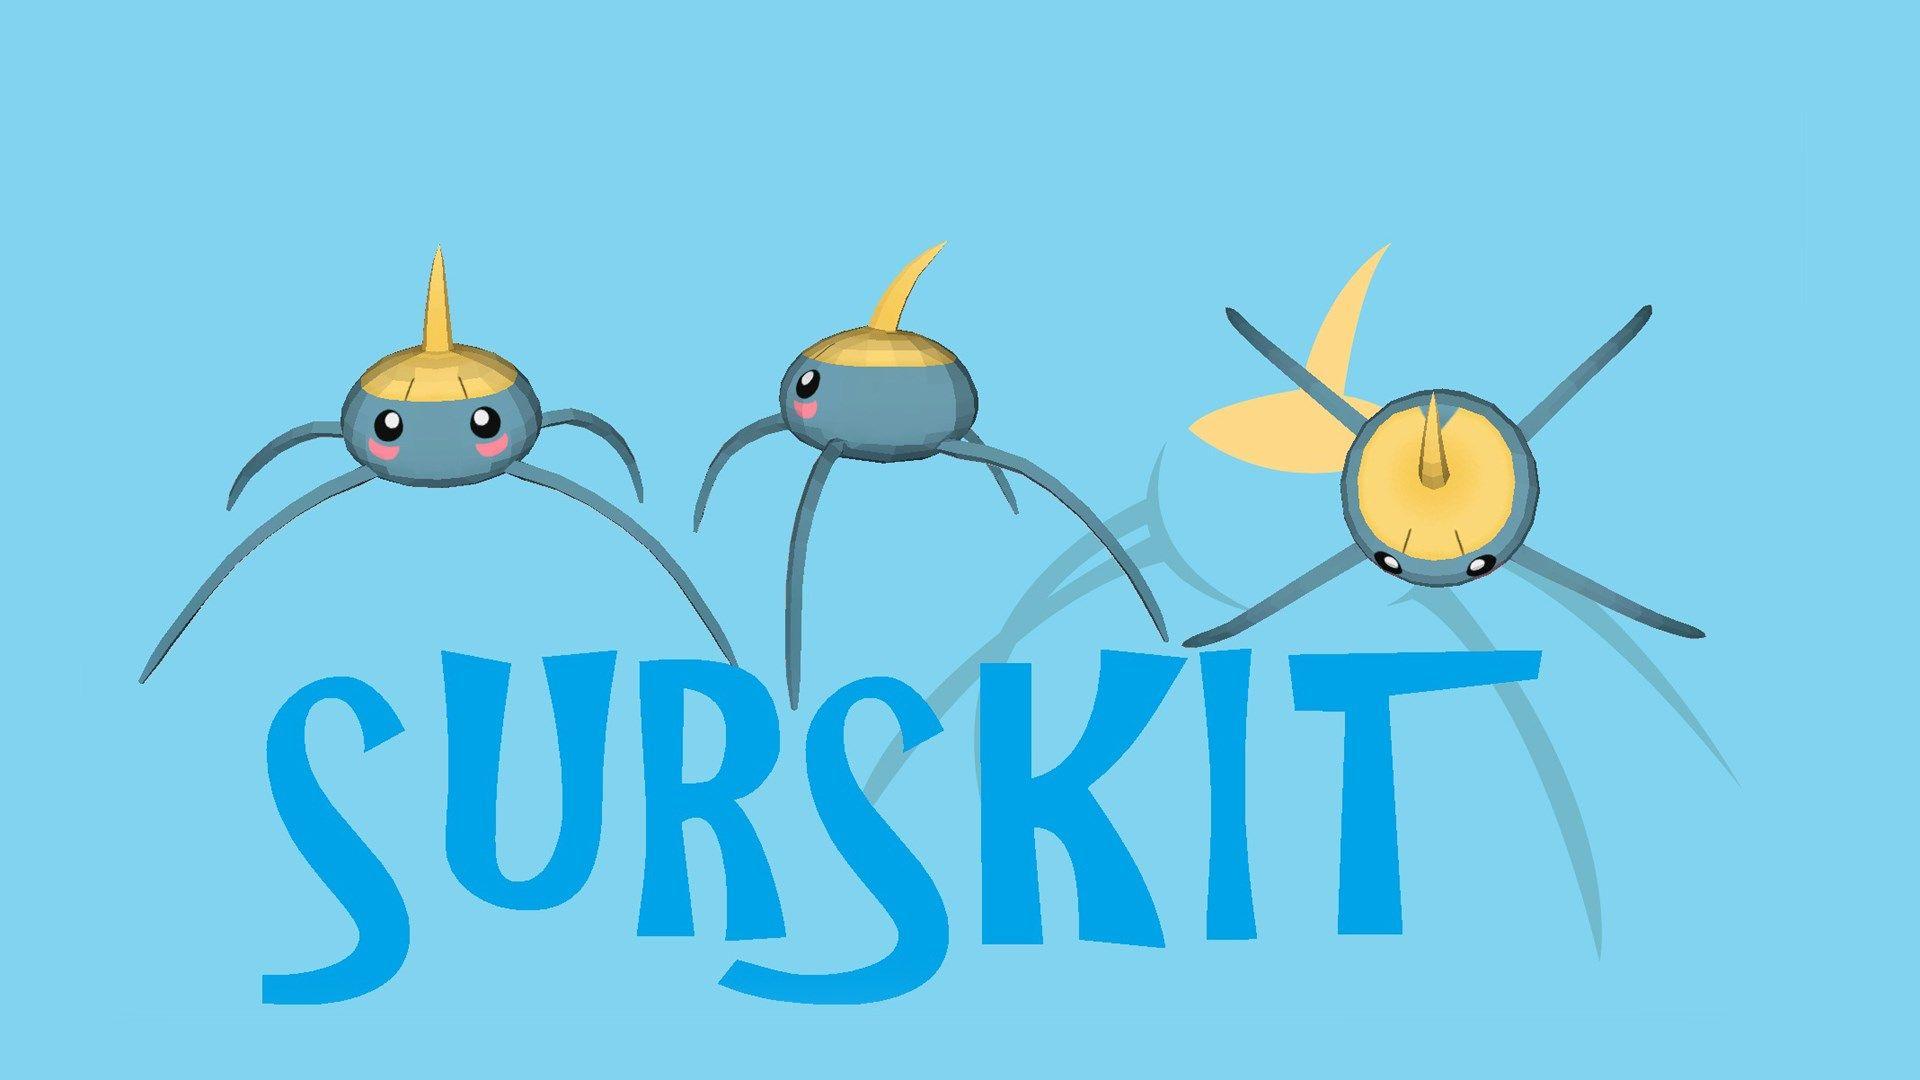 Surskit Hd Wallpapers